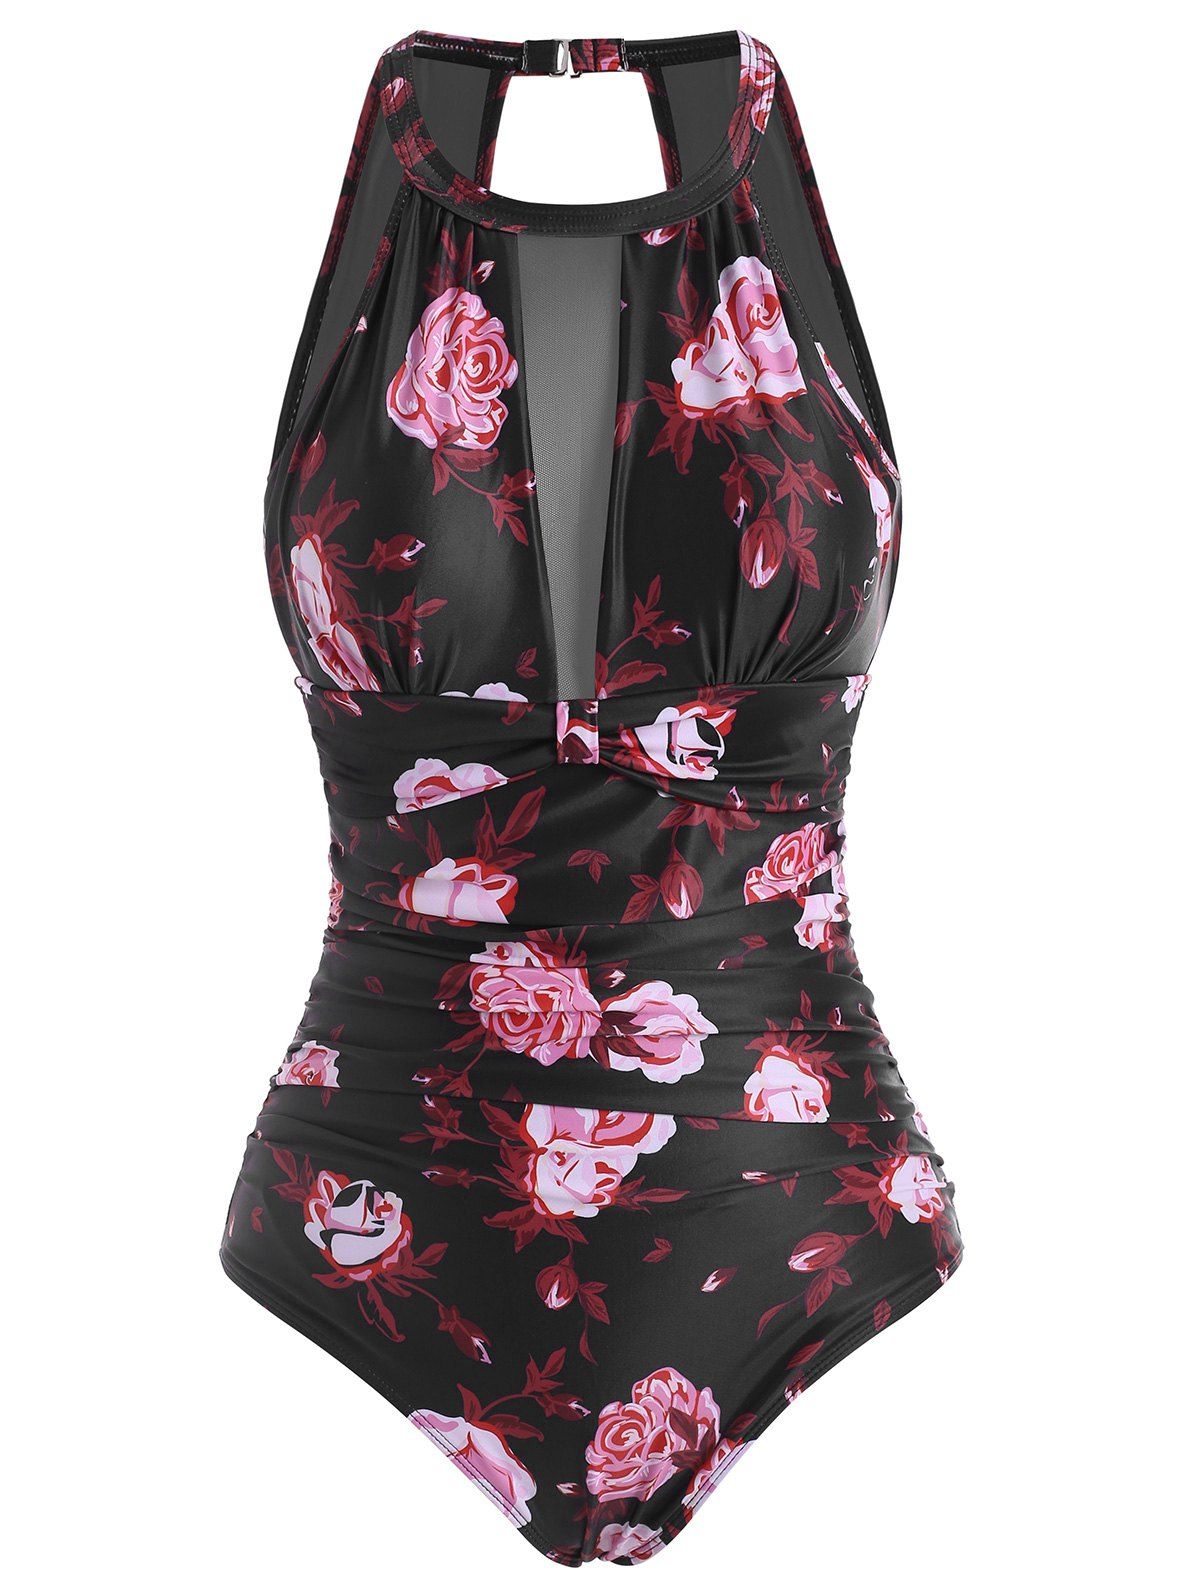 Mesh Panel Ruched Floral One-piece Swimsuit - BLACK XL